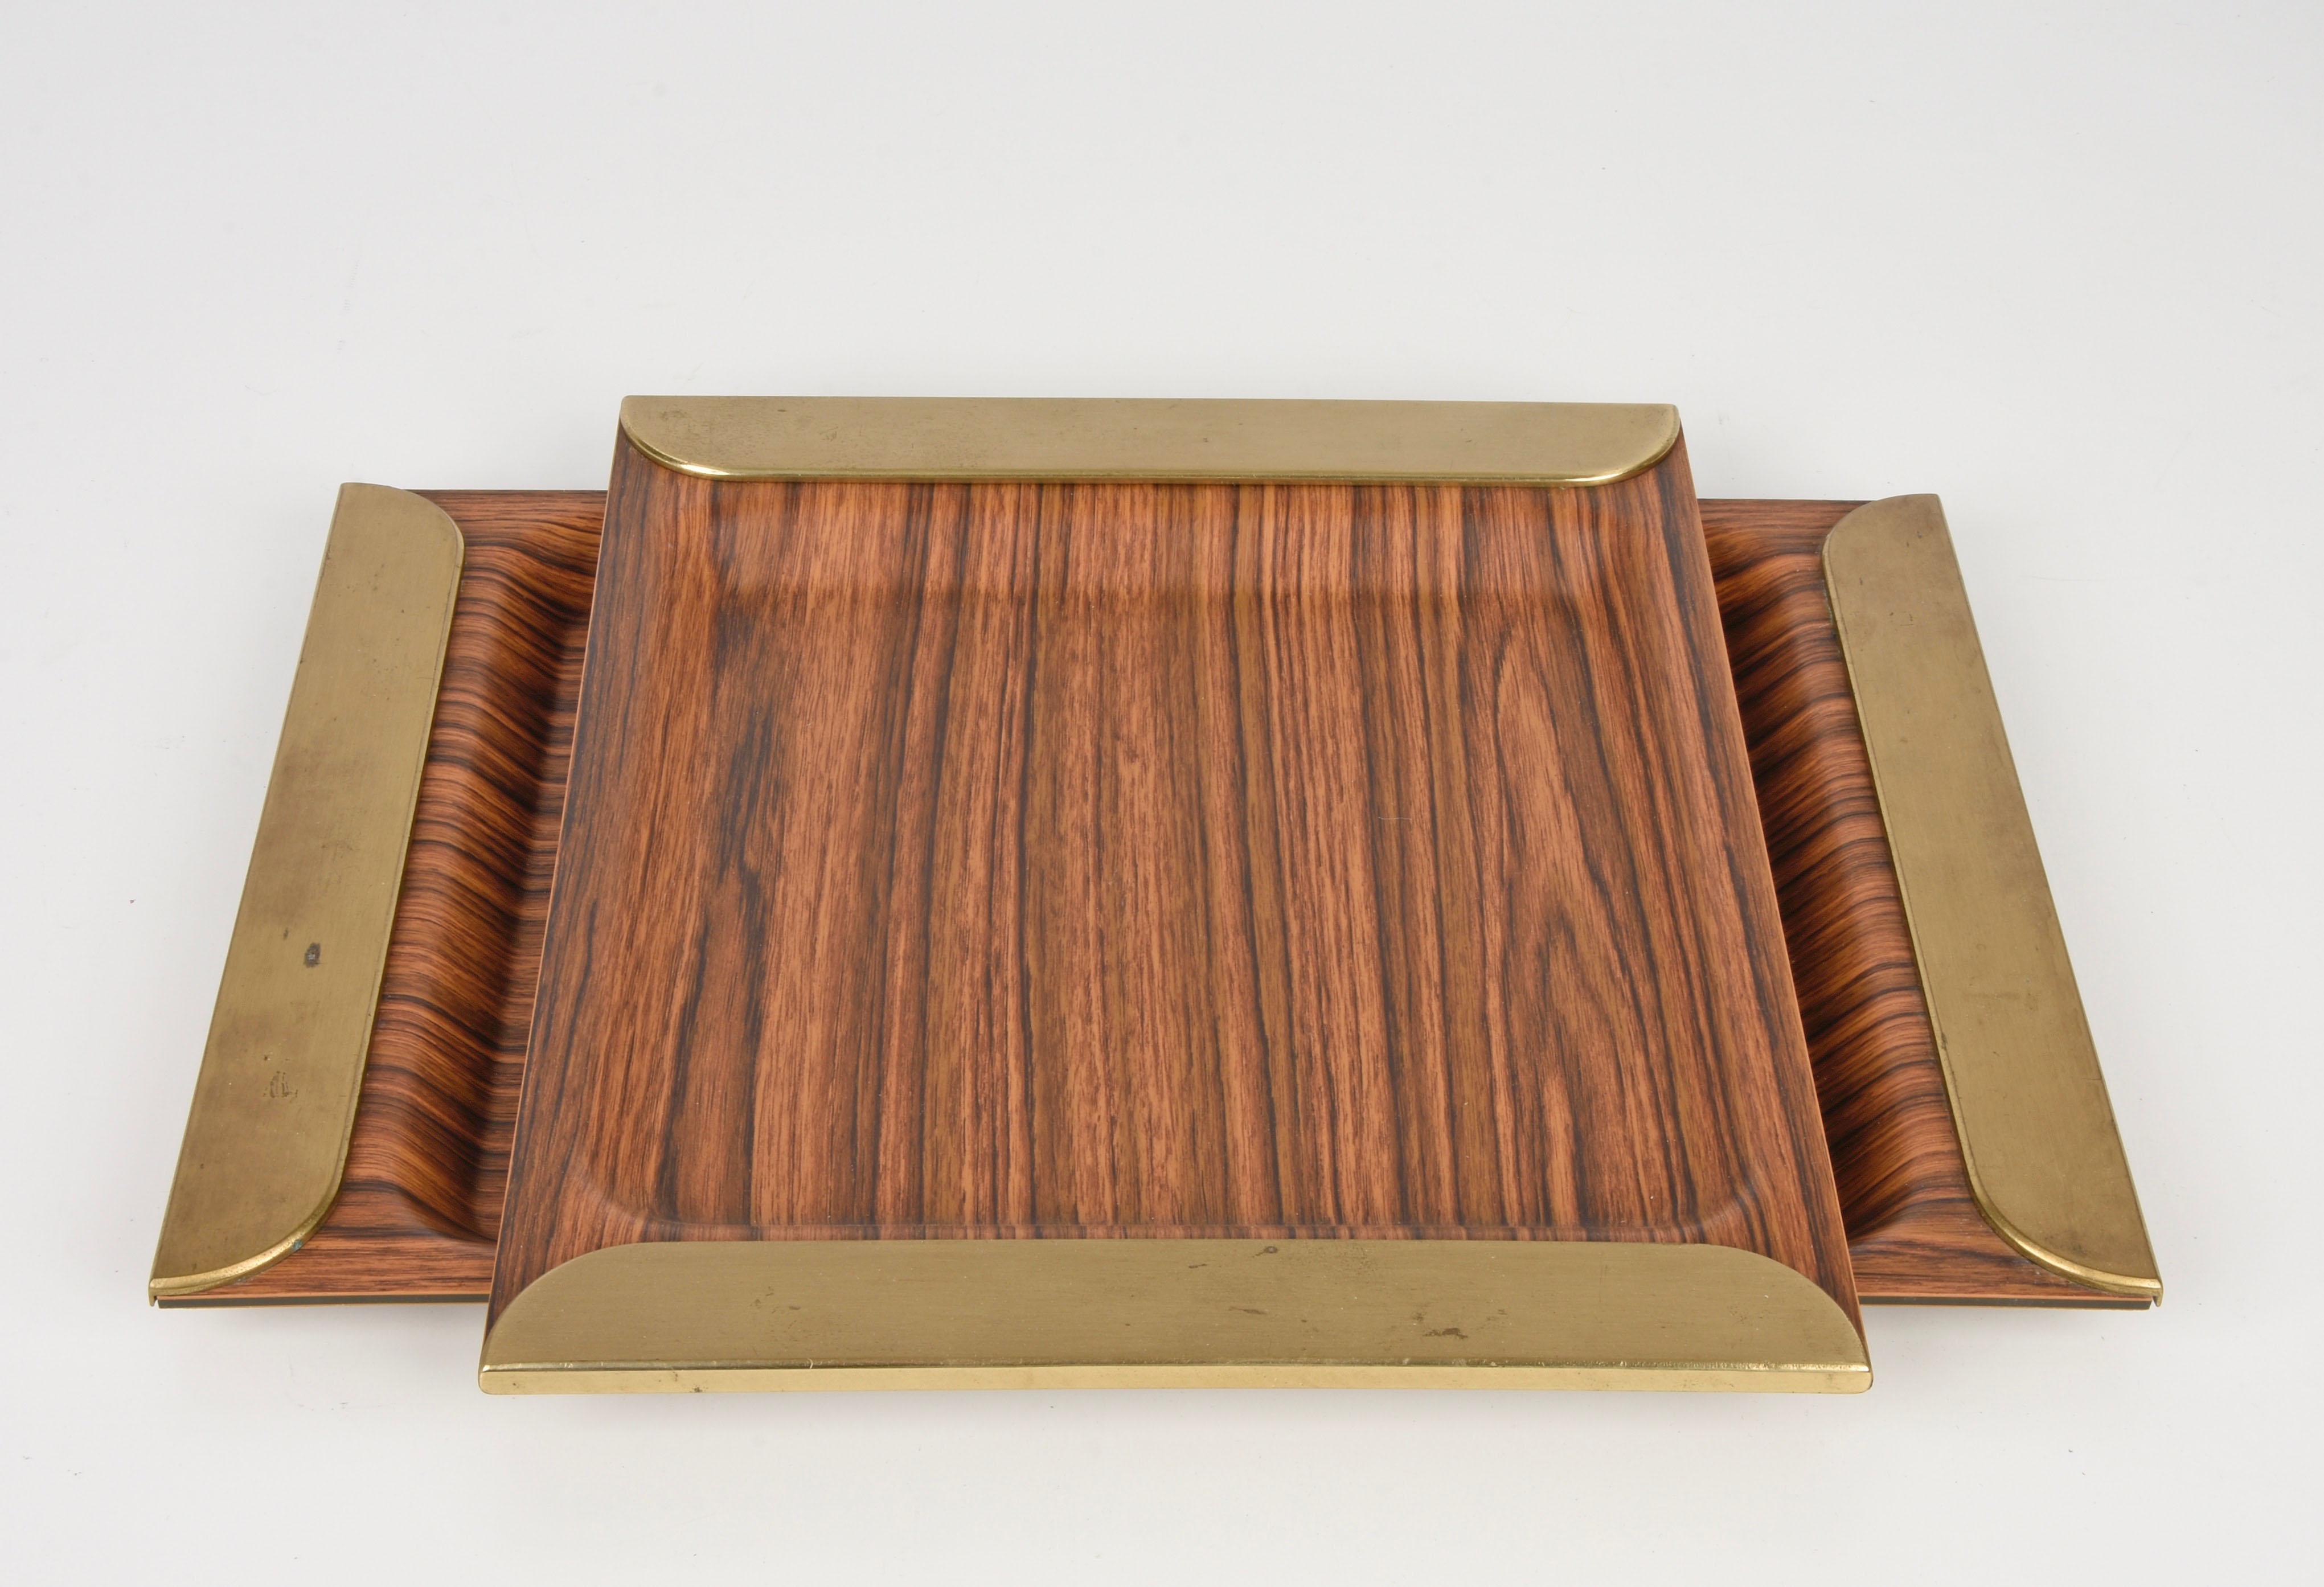  Pair of Midcentury Laminate and Brass Italian Trays Serving Pieces, 1970s For Sale 1